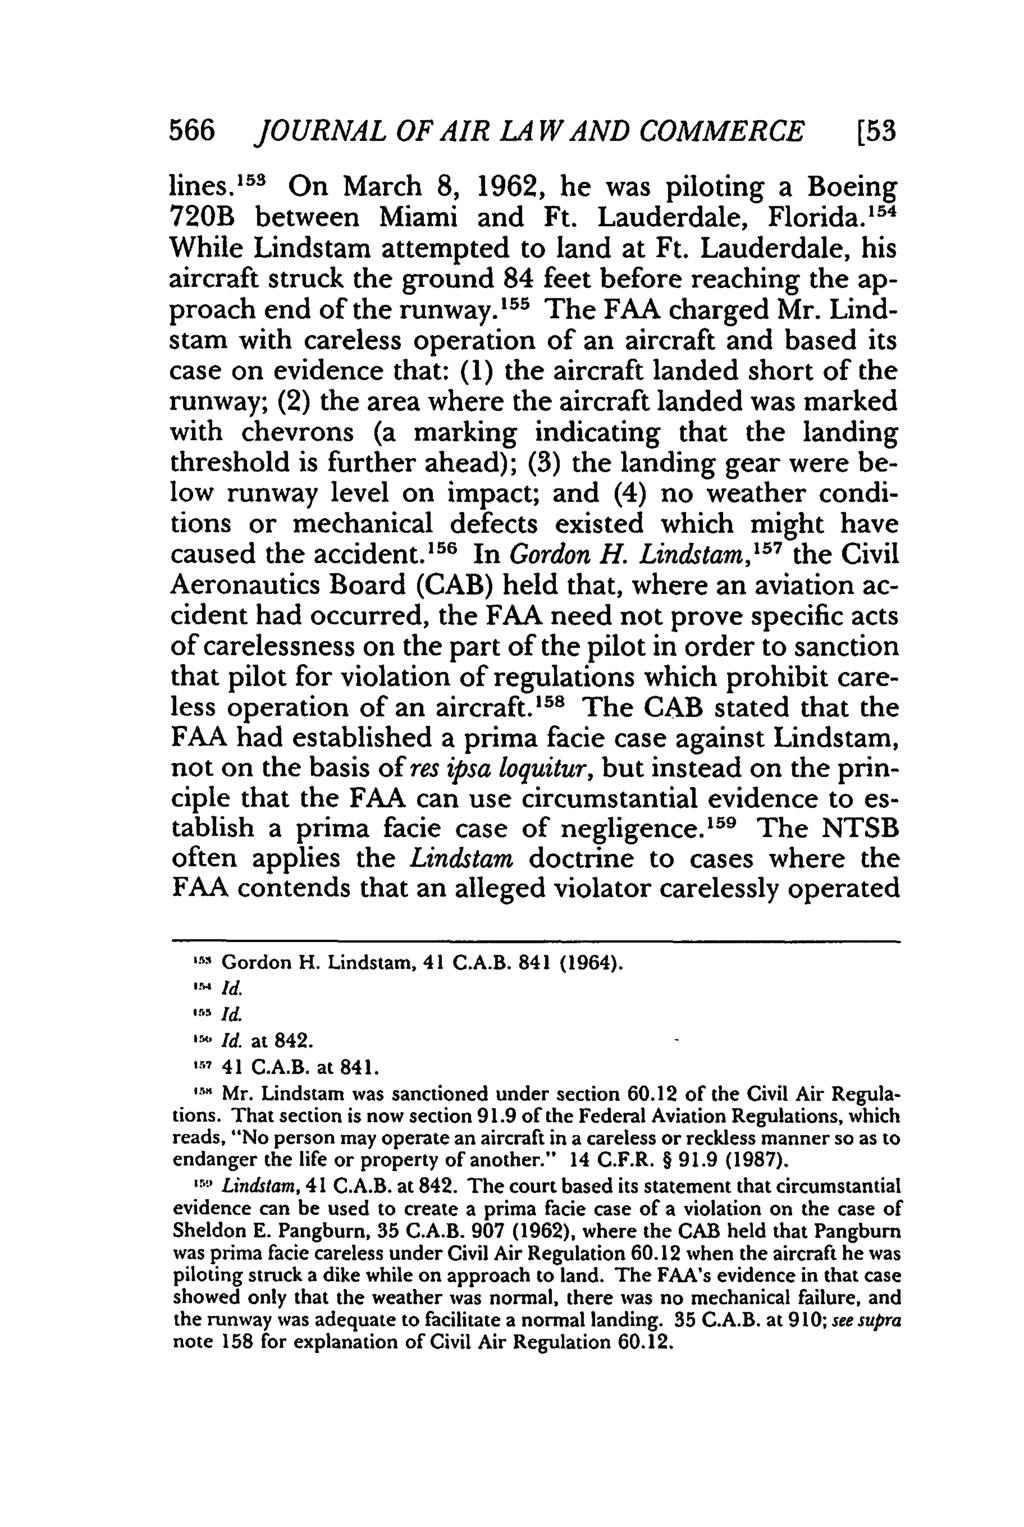 566 JOURNAL OF AIR LA WAND COMMERCE [53 lines.' 53 On March 8, 1962, he was piloting a Boeing 720B between Miami and Ft. Lauderdale, Florida. 54 While Lindstam attempted to land at Ft.